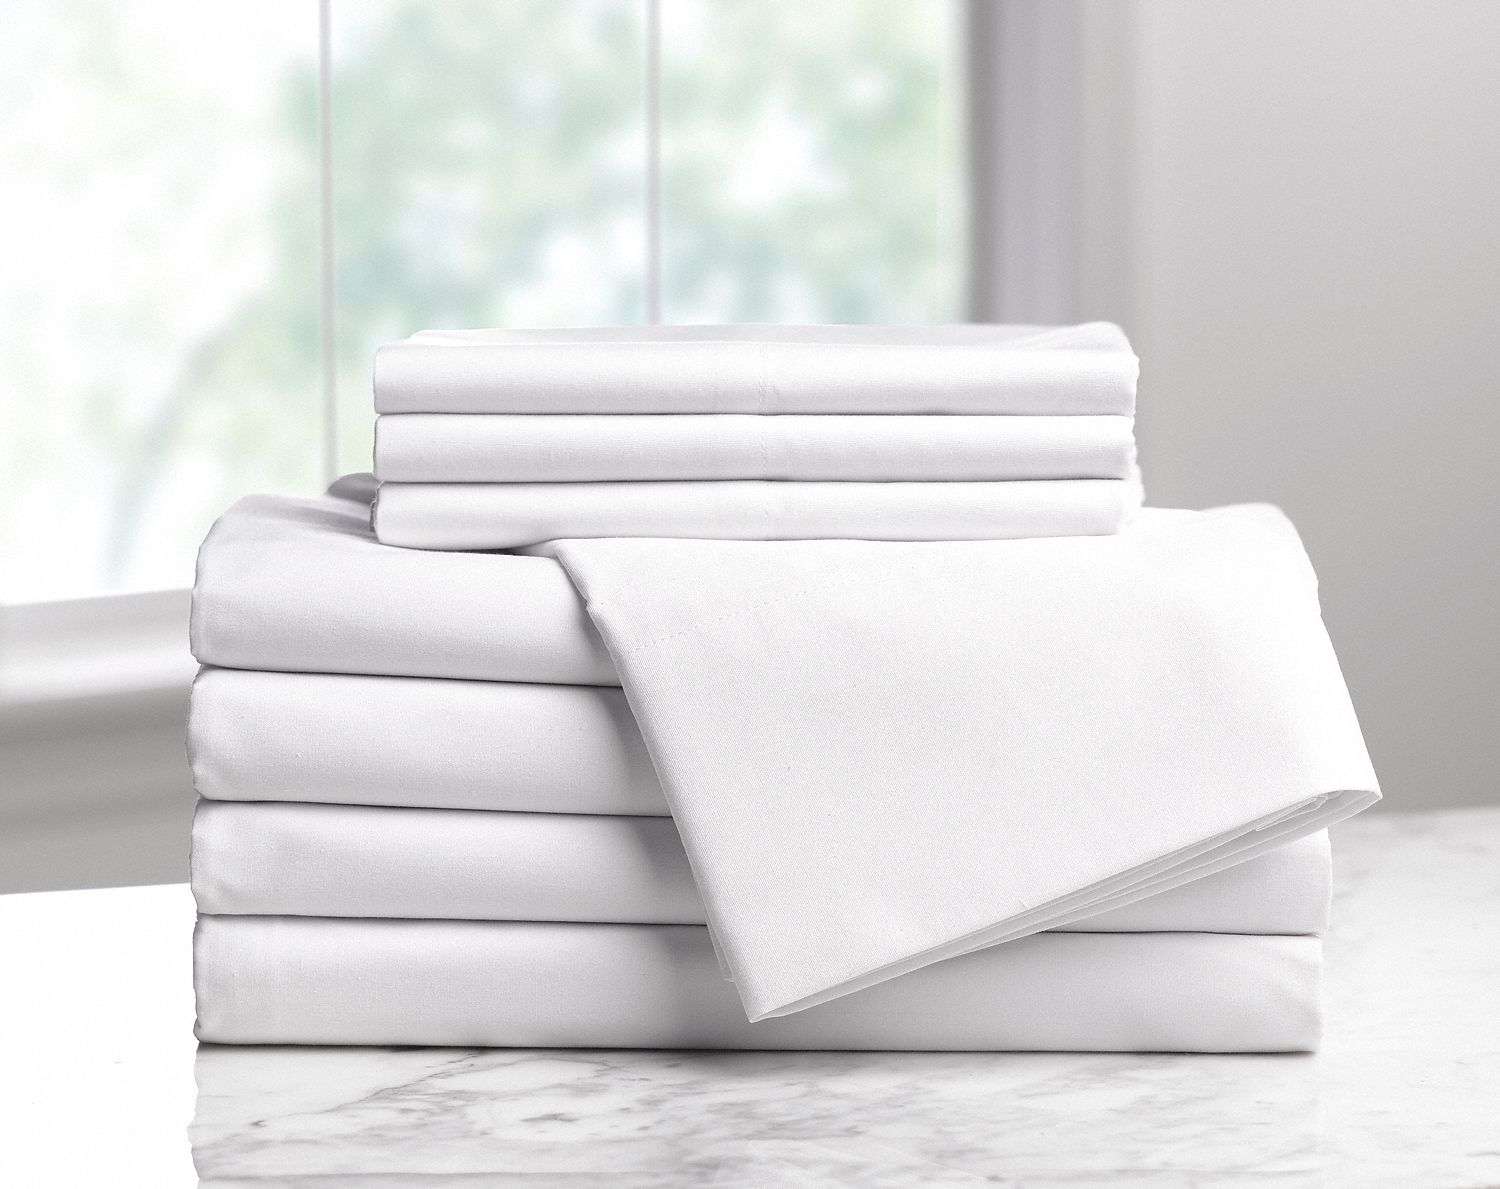 Flat Sheet: Flat, Queen XL, 93 in Wd, 120 in Lg, 60% Cotton/40% Polyester Fabric, T200, 6 PK